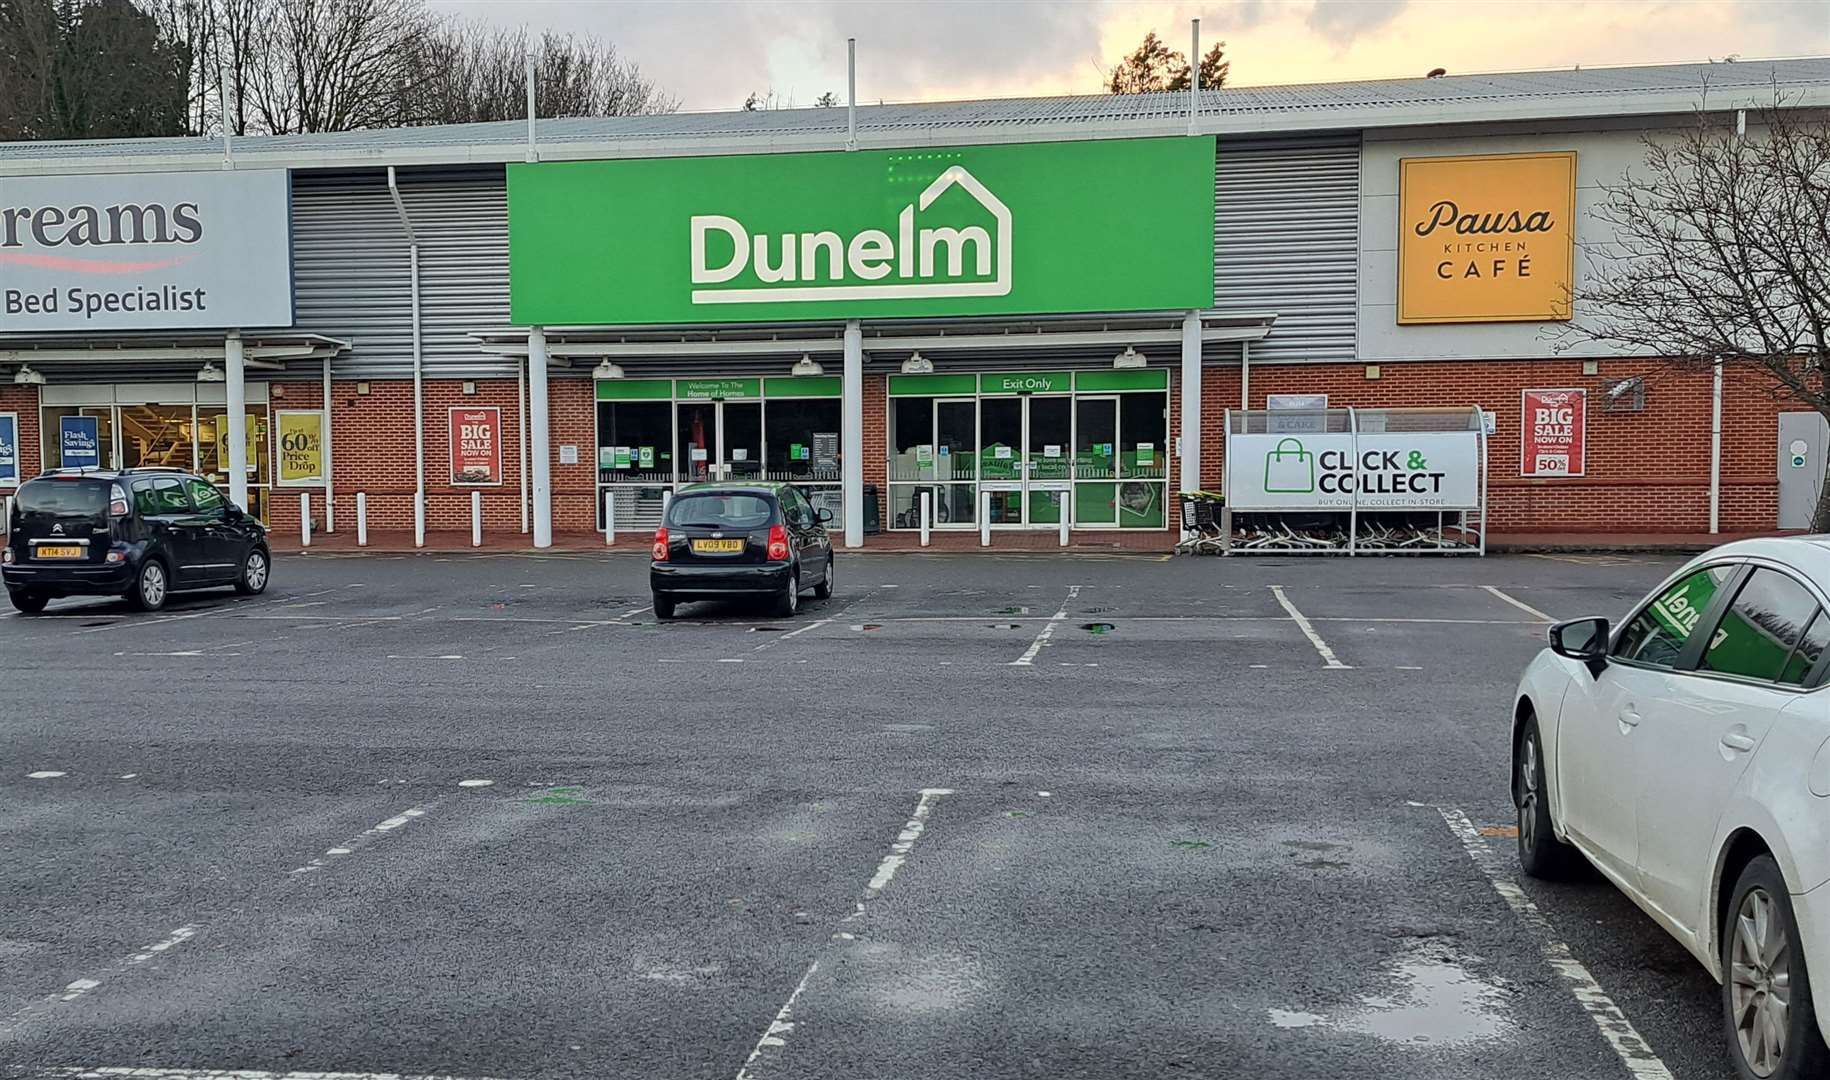 Dunelm in Maidstone was shut as a result of the incident